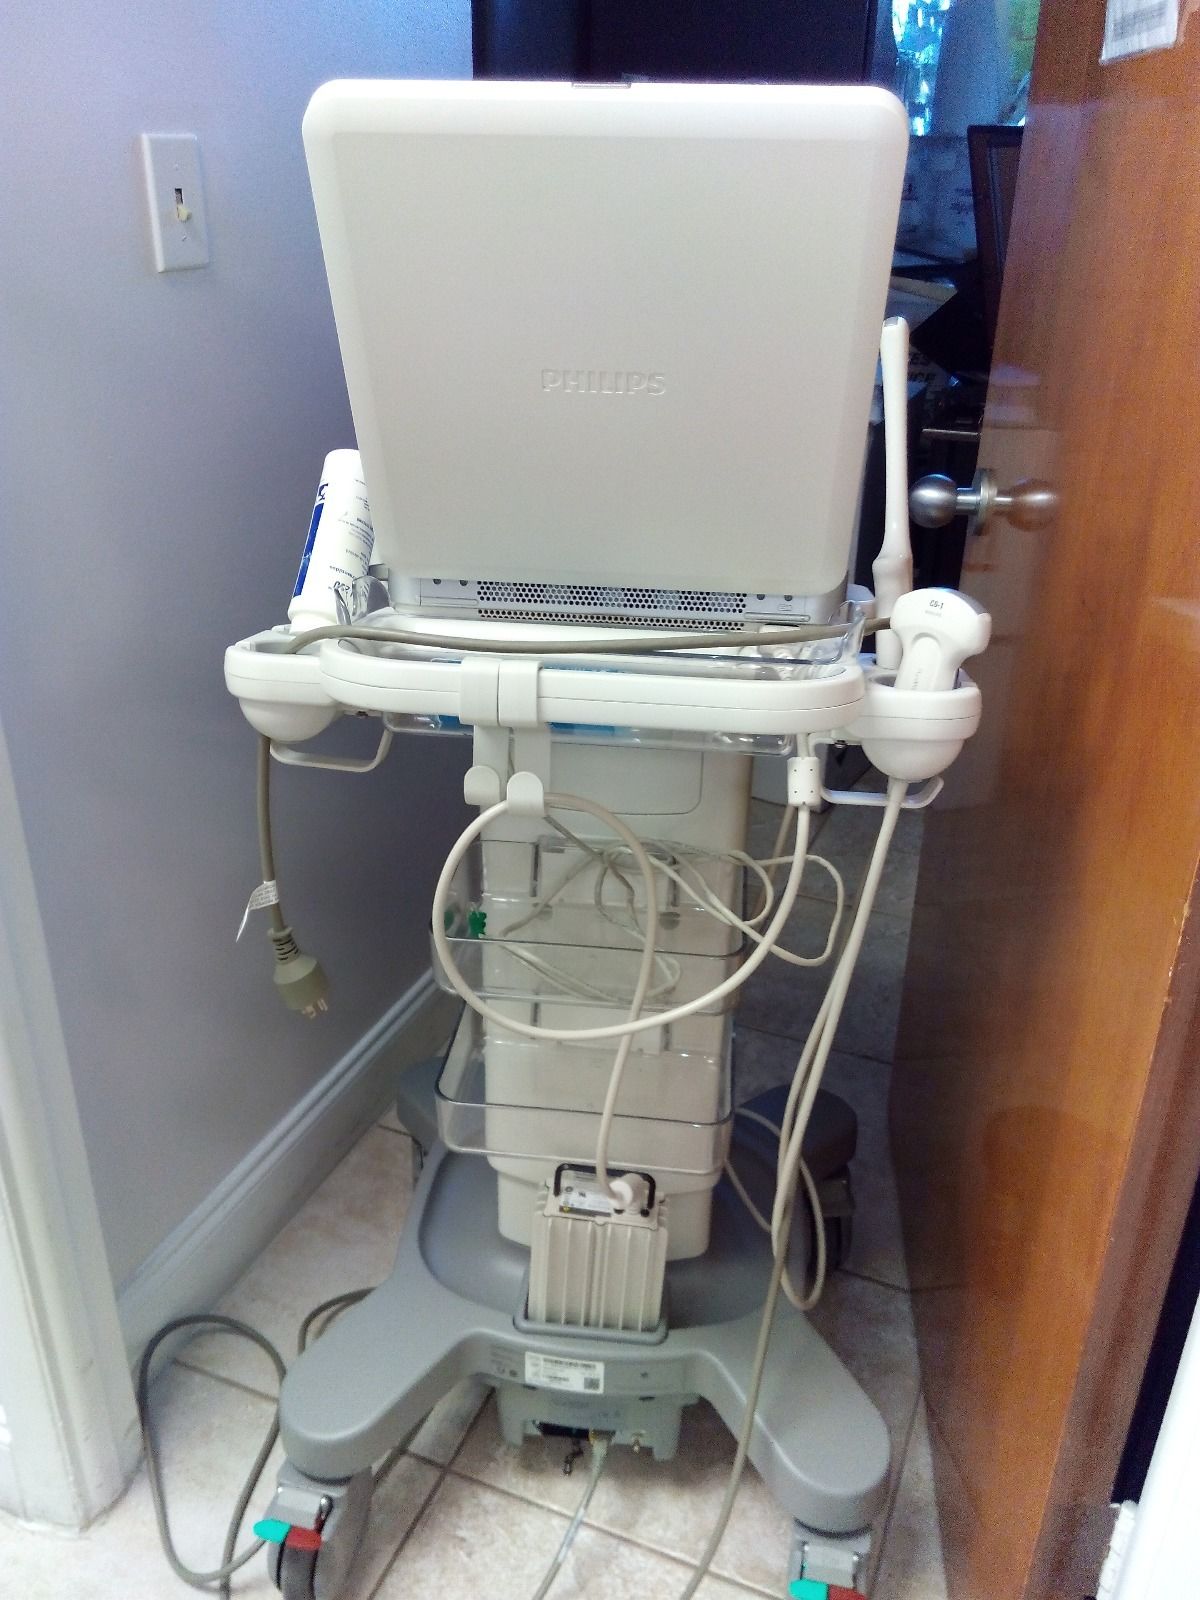 a laptop computer sitting on top of a medical cart